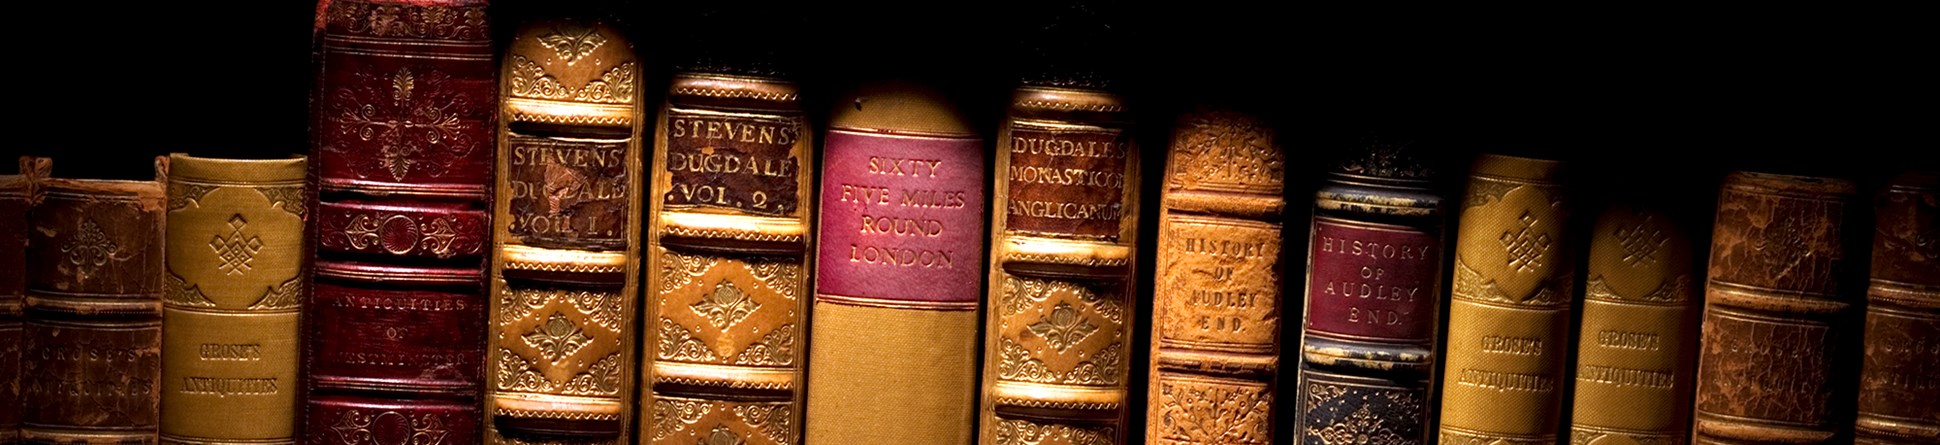 Antiquarian books on a shelf in our reference library in Swindon.